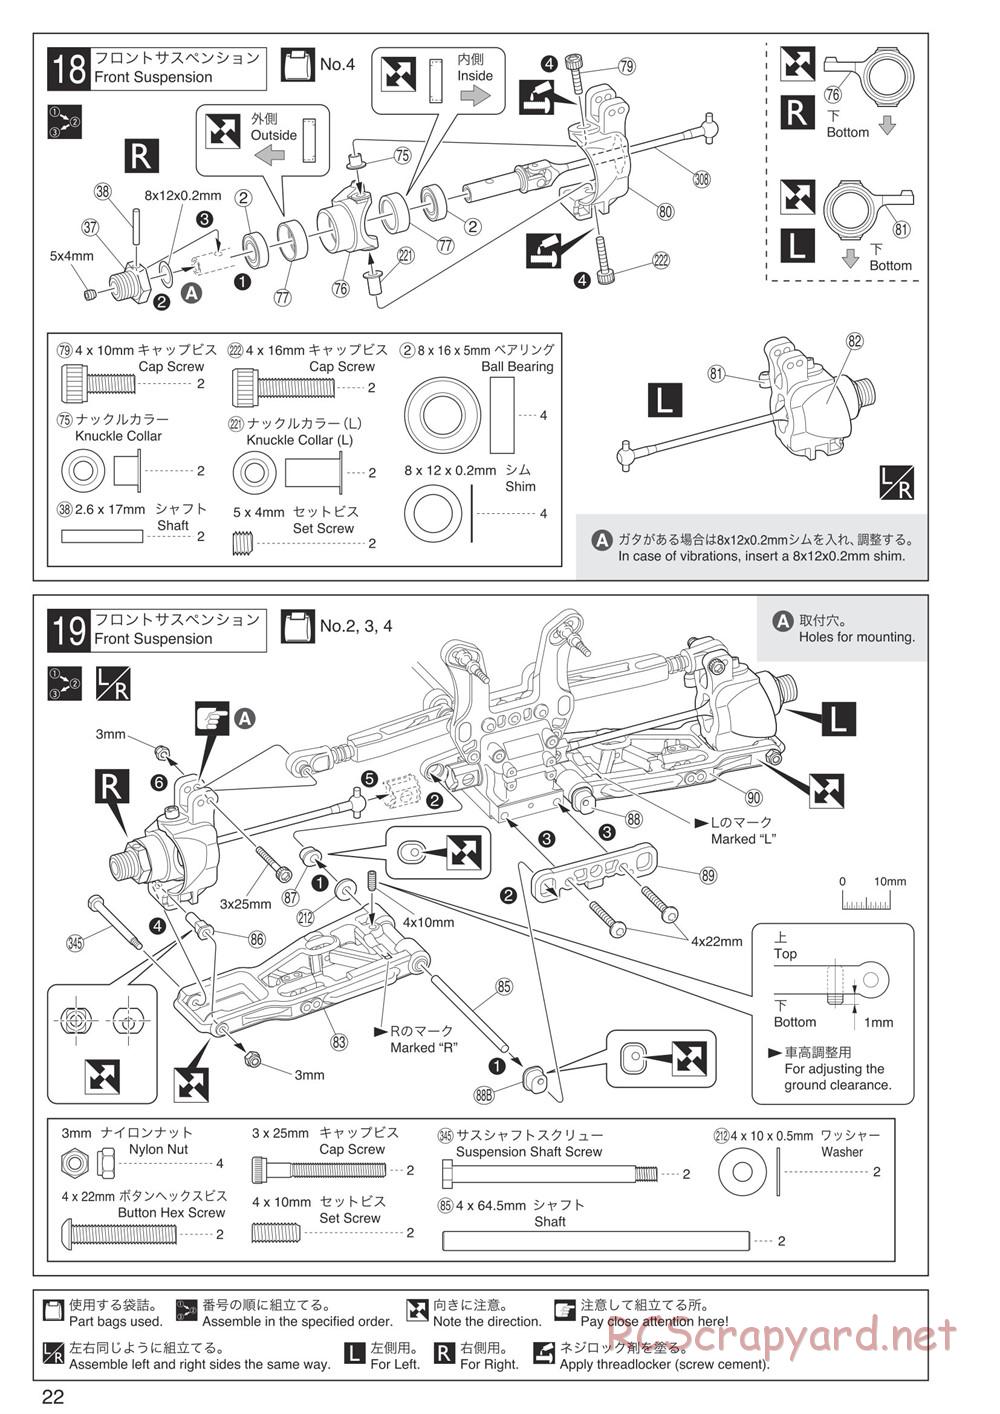 Kyosho - Inferno MP9 TKI4 10th Anniversary Special Edition - Manual - Page 22